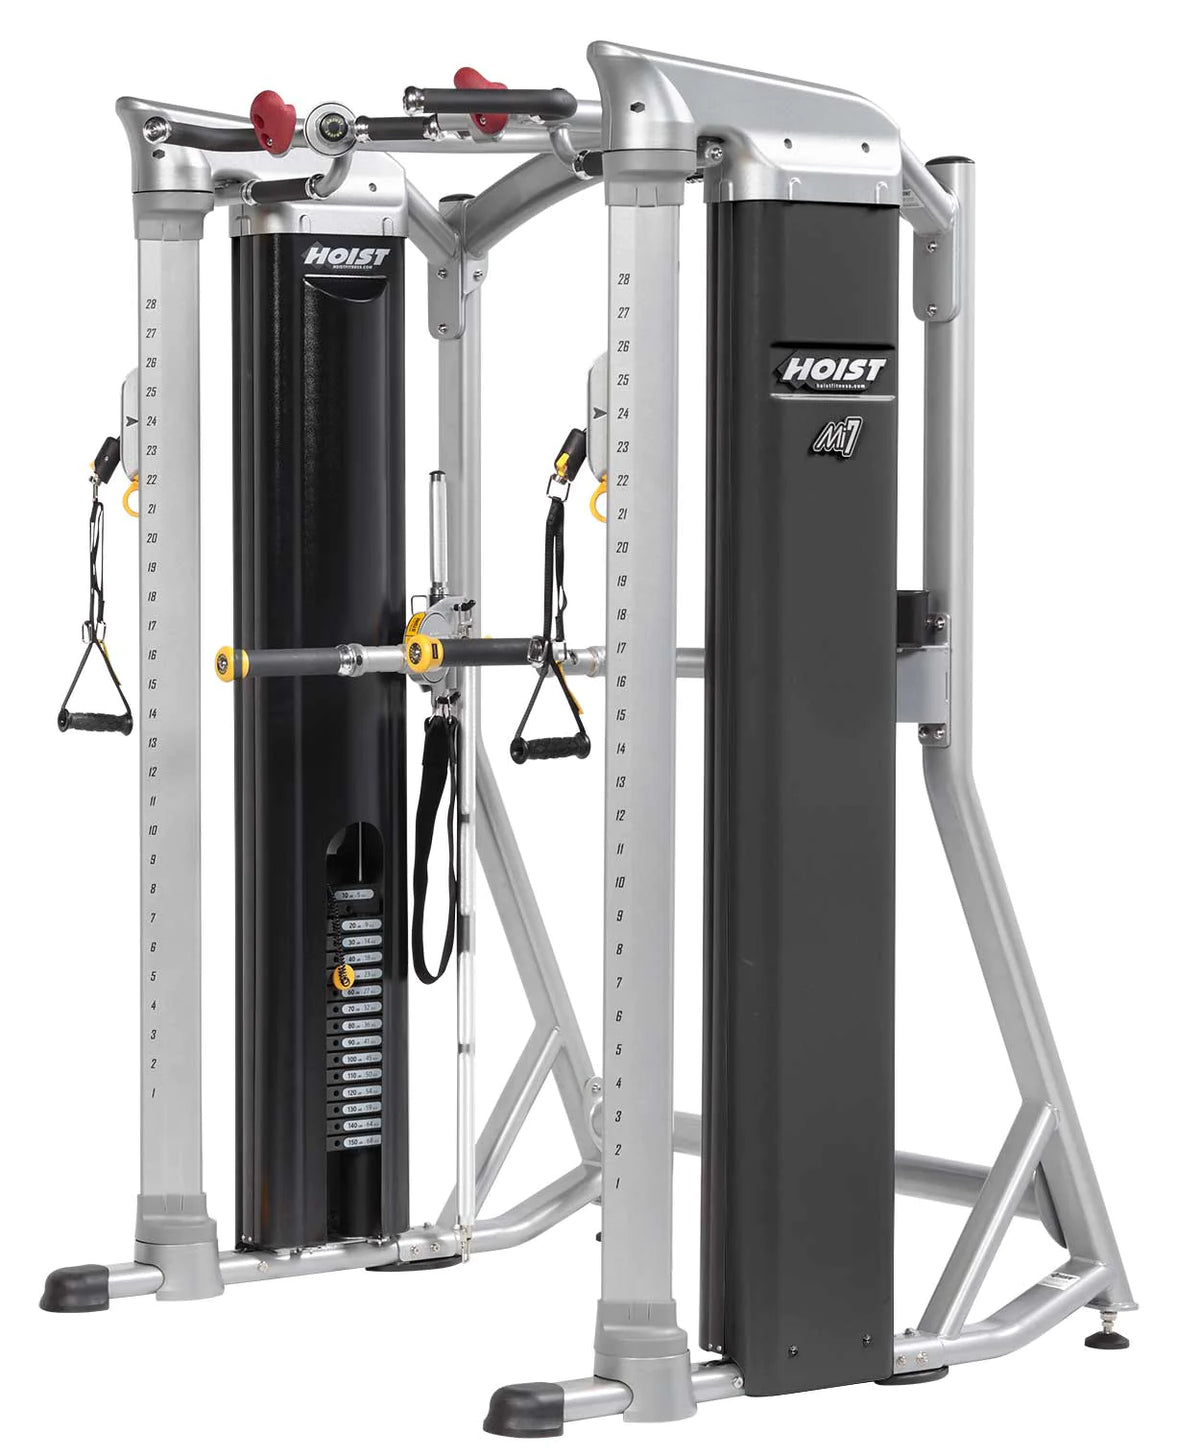 Hoist Fitness Mi7 Functional Training System without core stabilizer pad | Fitness Experience 